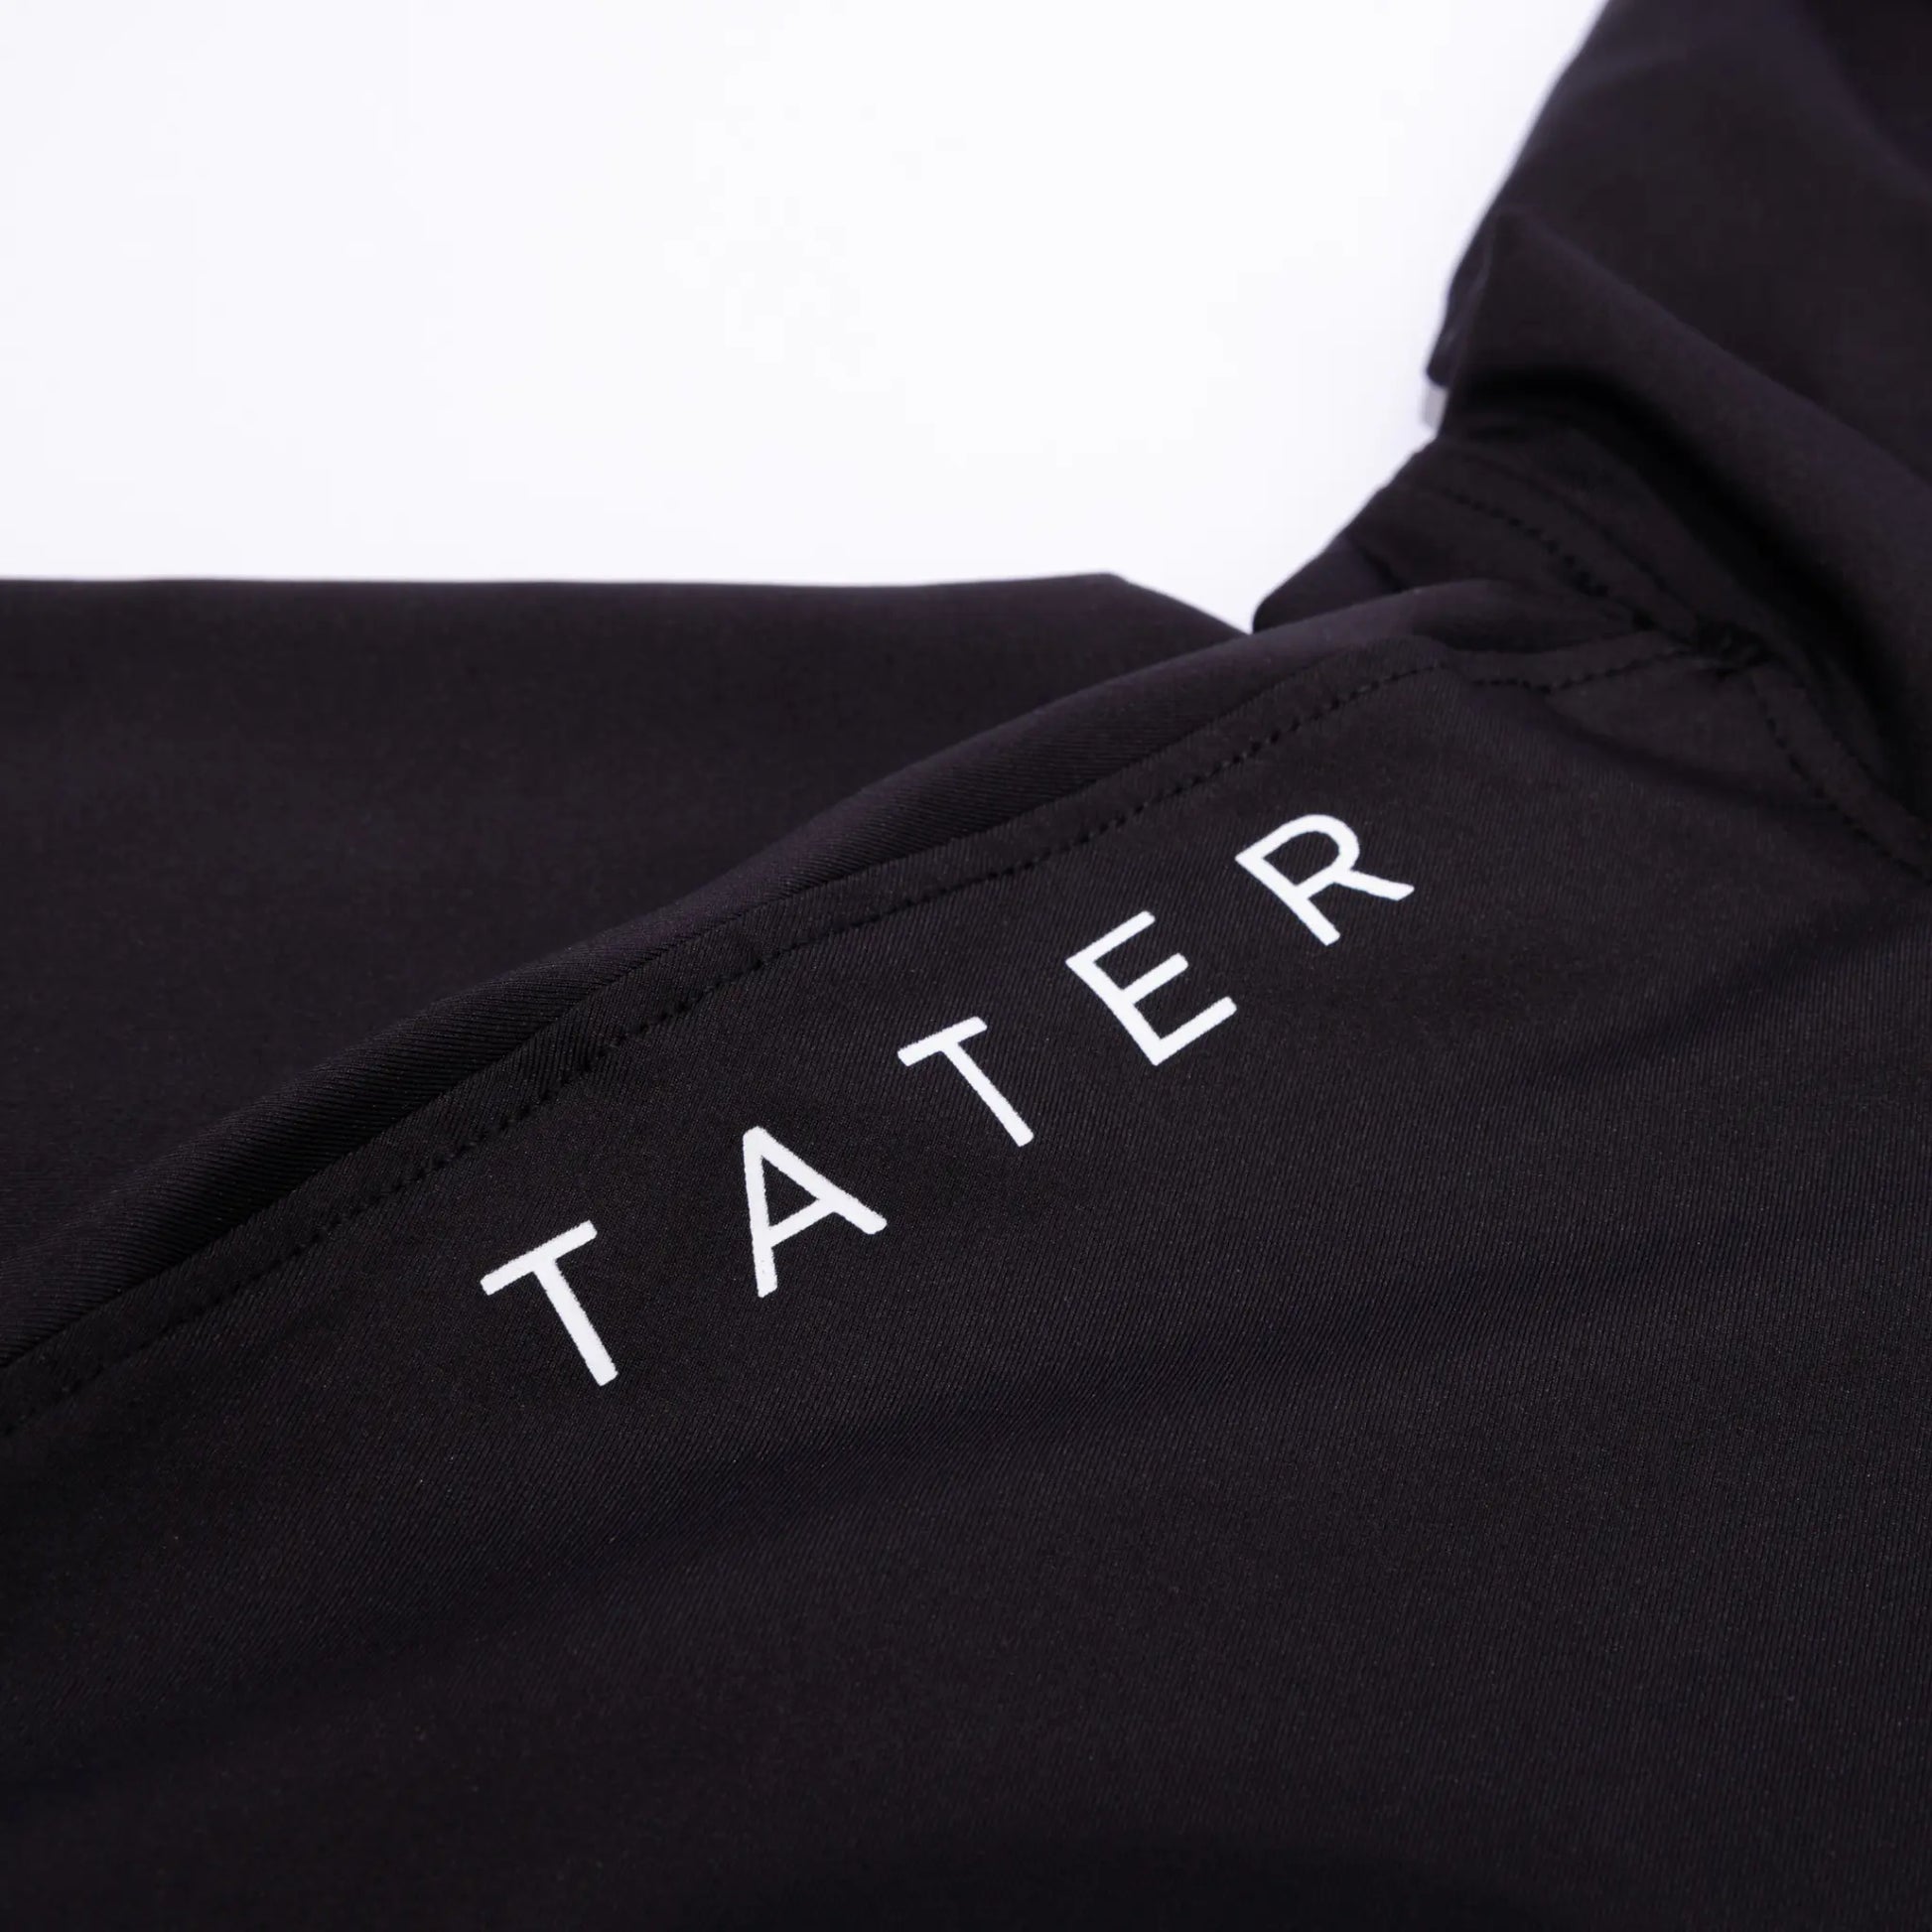 "Detail of a black short-sleeve baseball hoodie with the 'TATER' logo printed in white, part of the Tater Baseball FUNDAMENTALS collection.